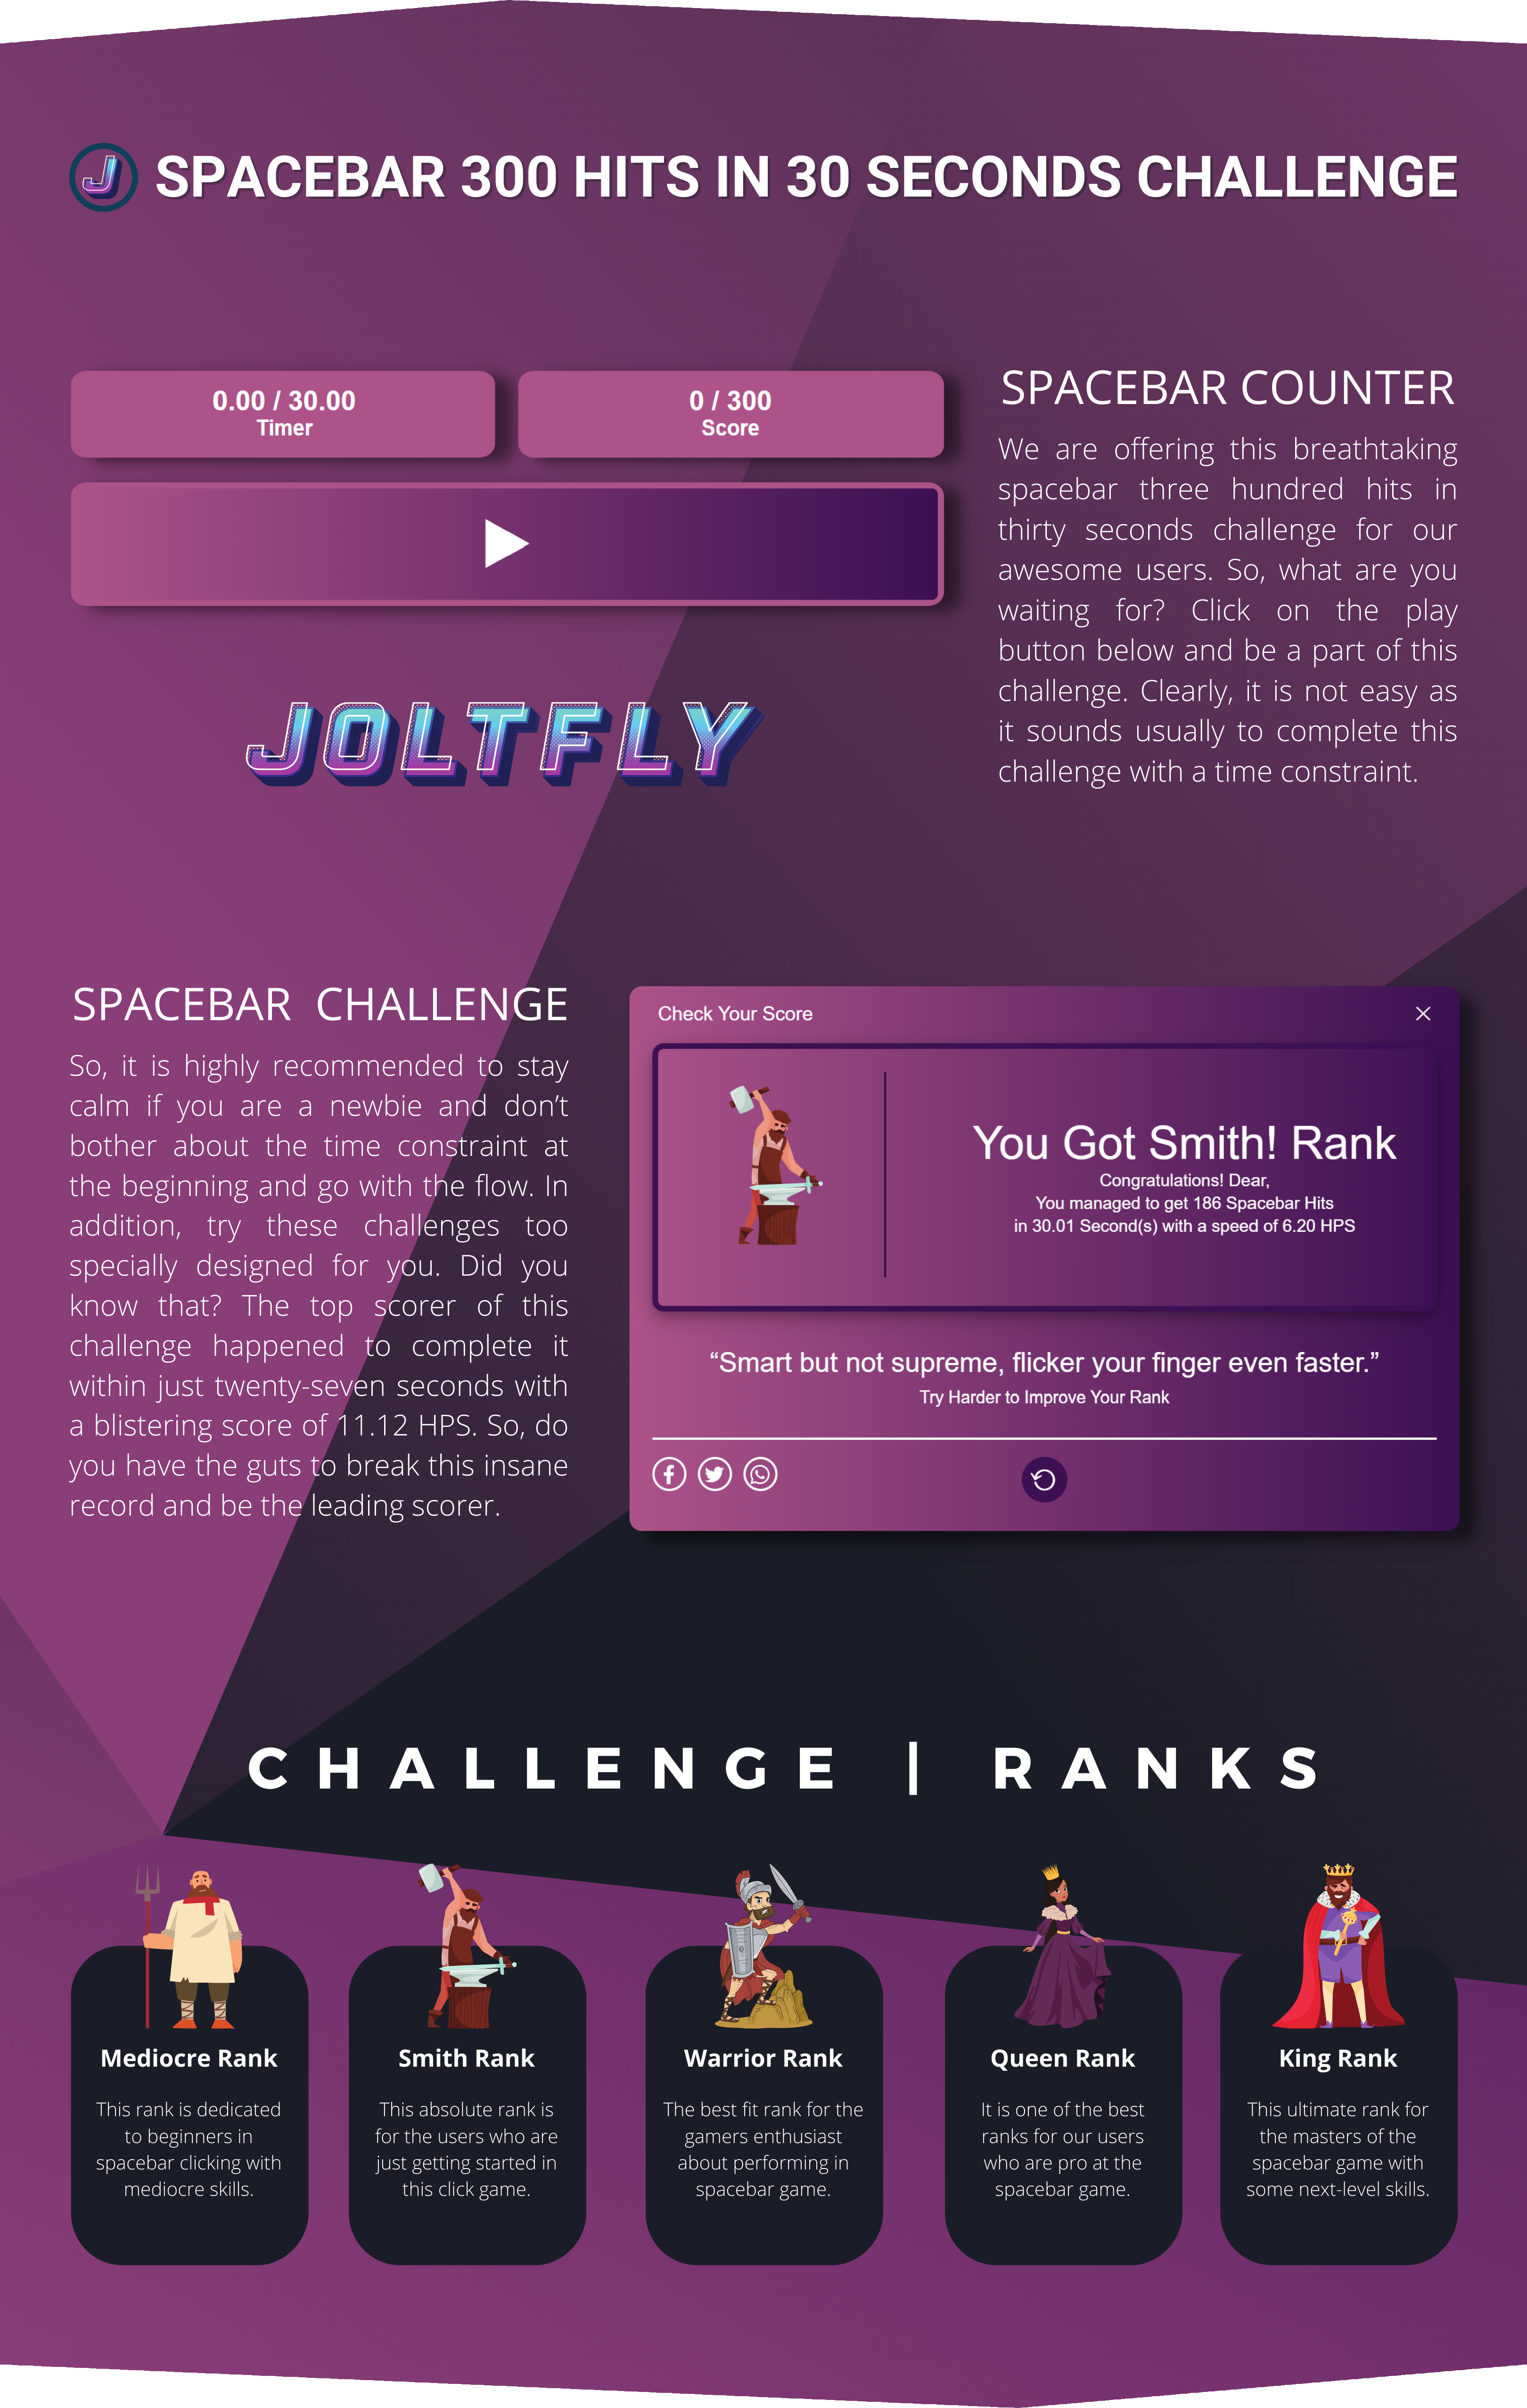 Clicks Per Thirty Seconds  Click Speed Challenge - Joltfly